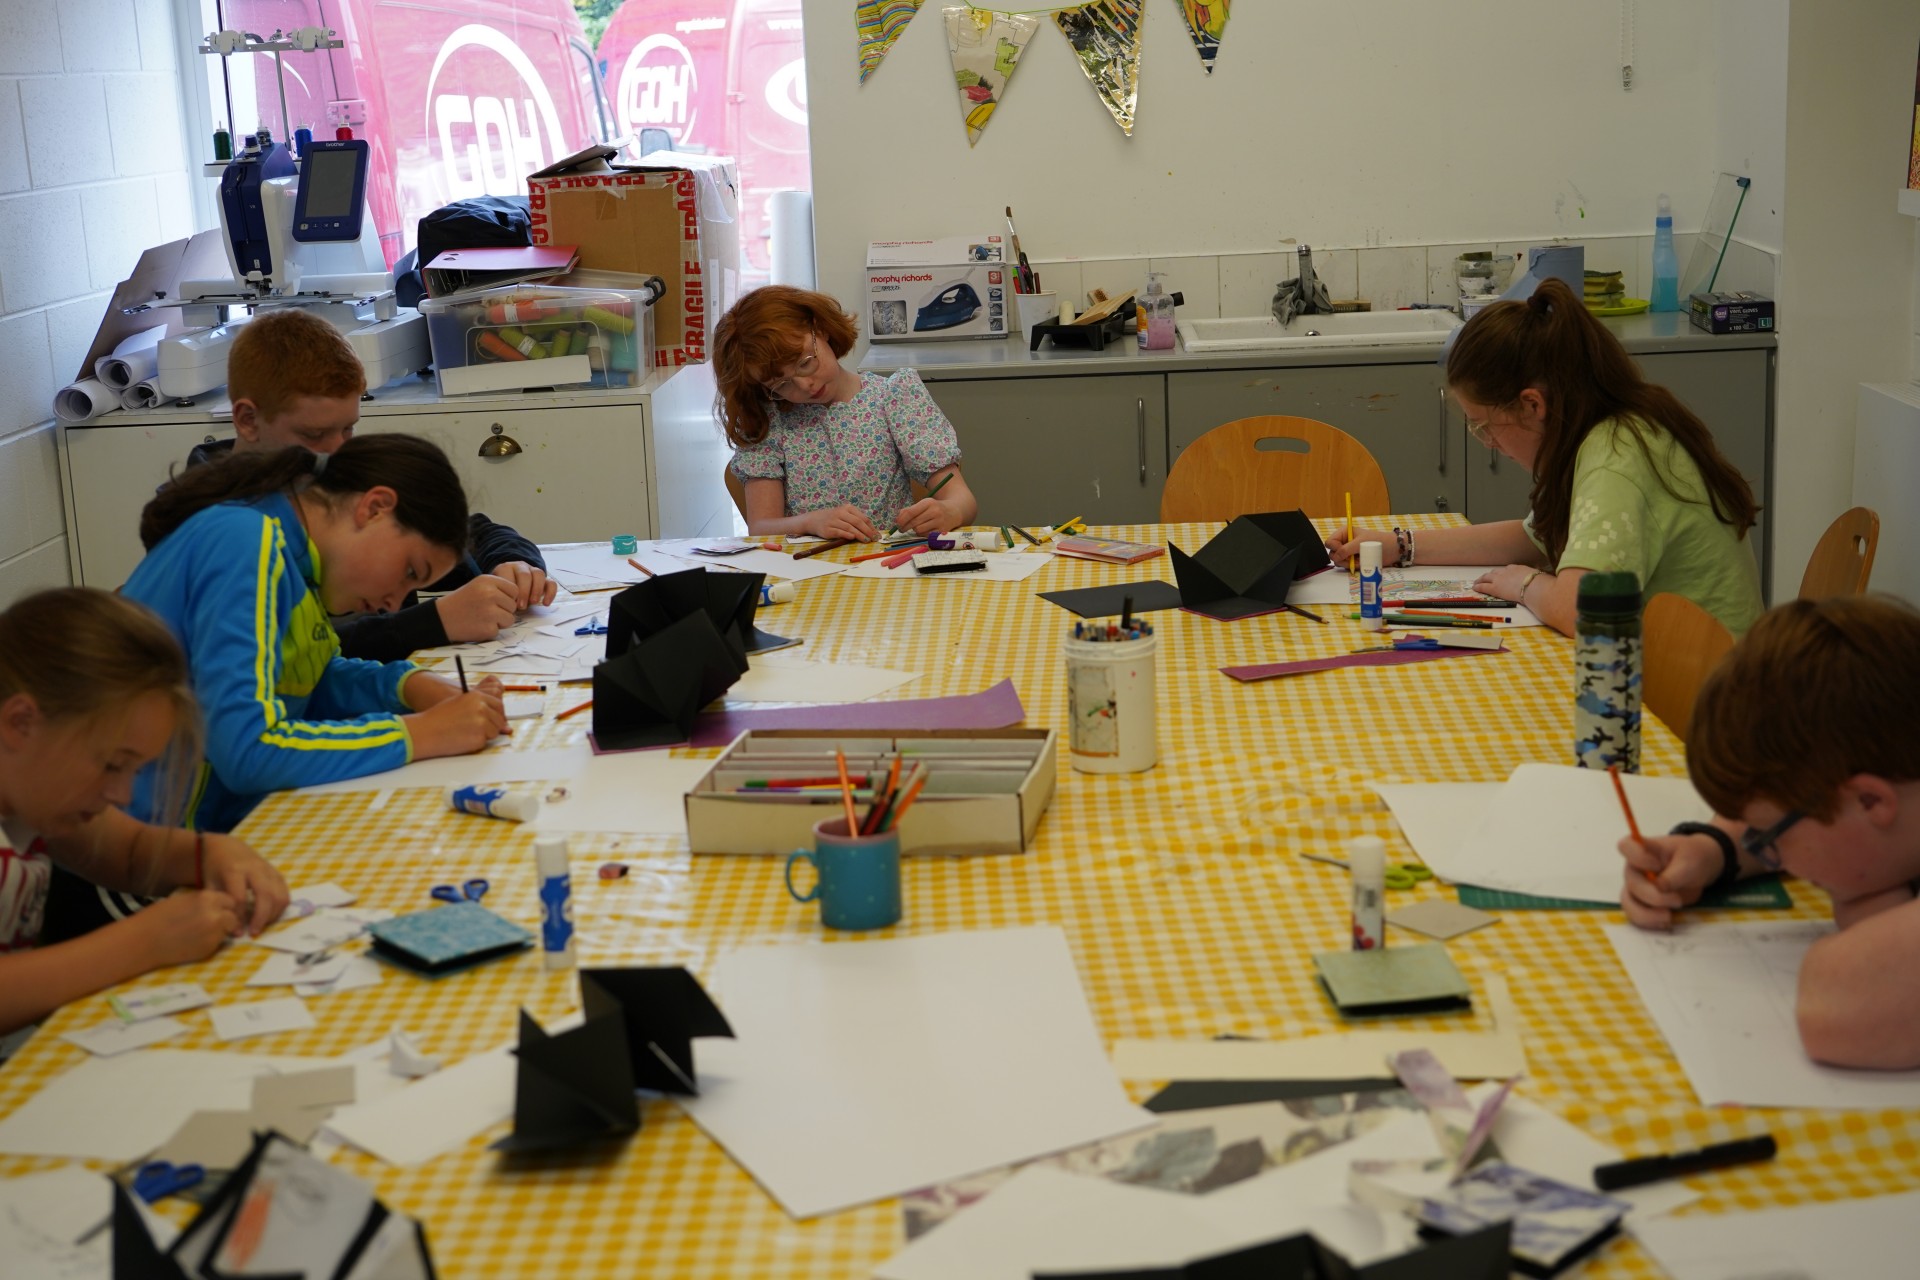 2019 Introduction to Printmaking May